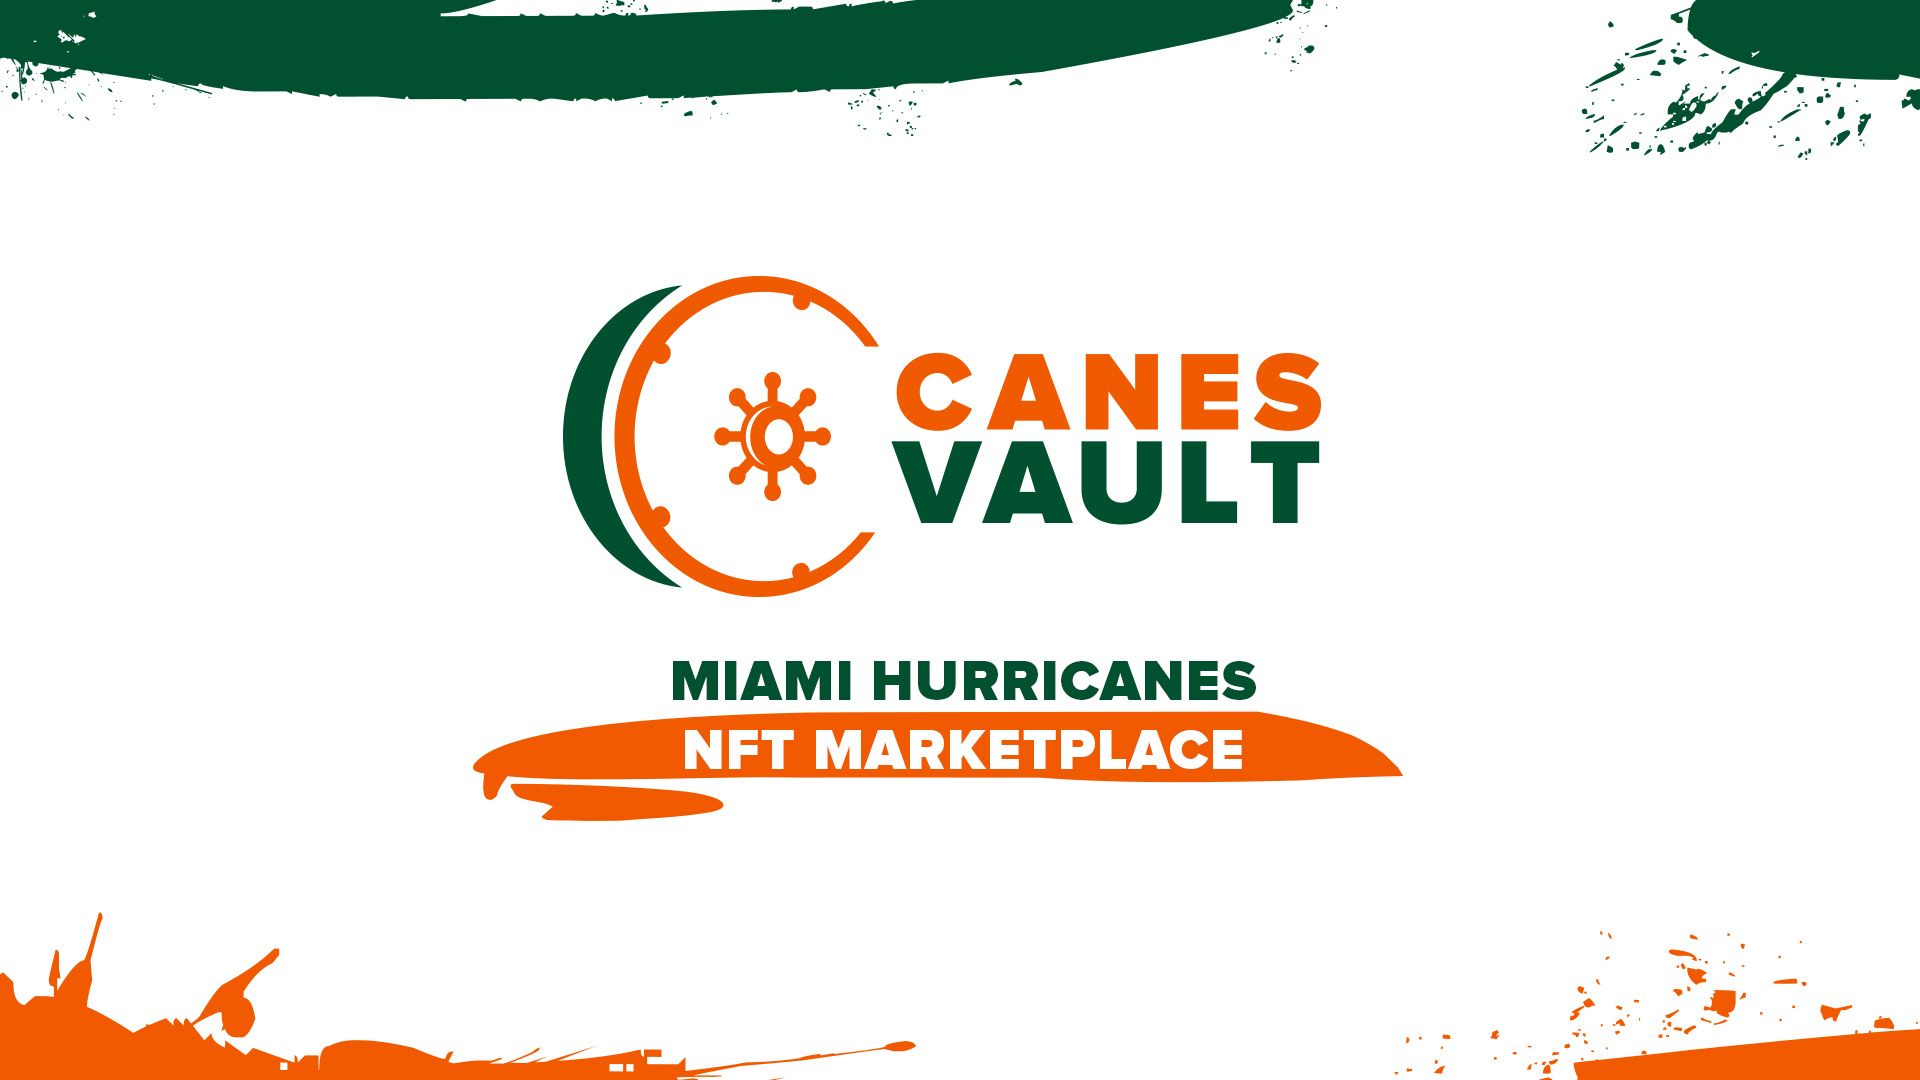 Miami Launches First-Of-Its-Kind NFT Platform 'Canes Vault'